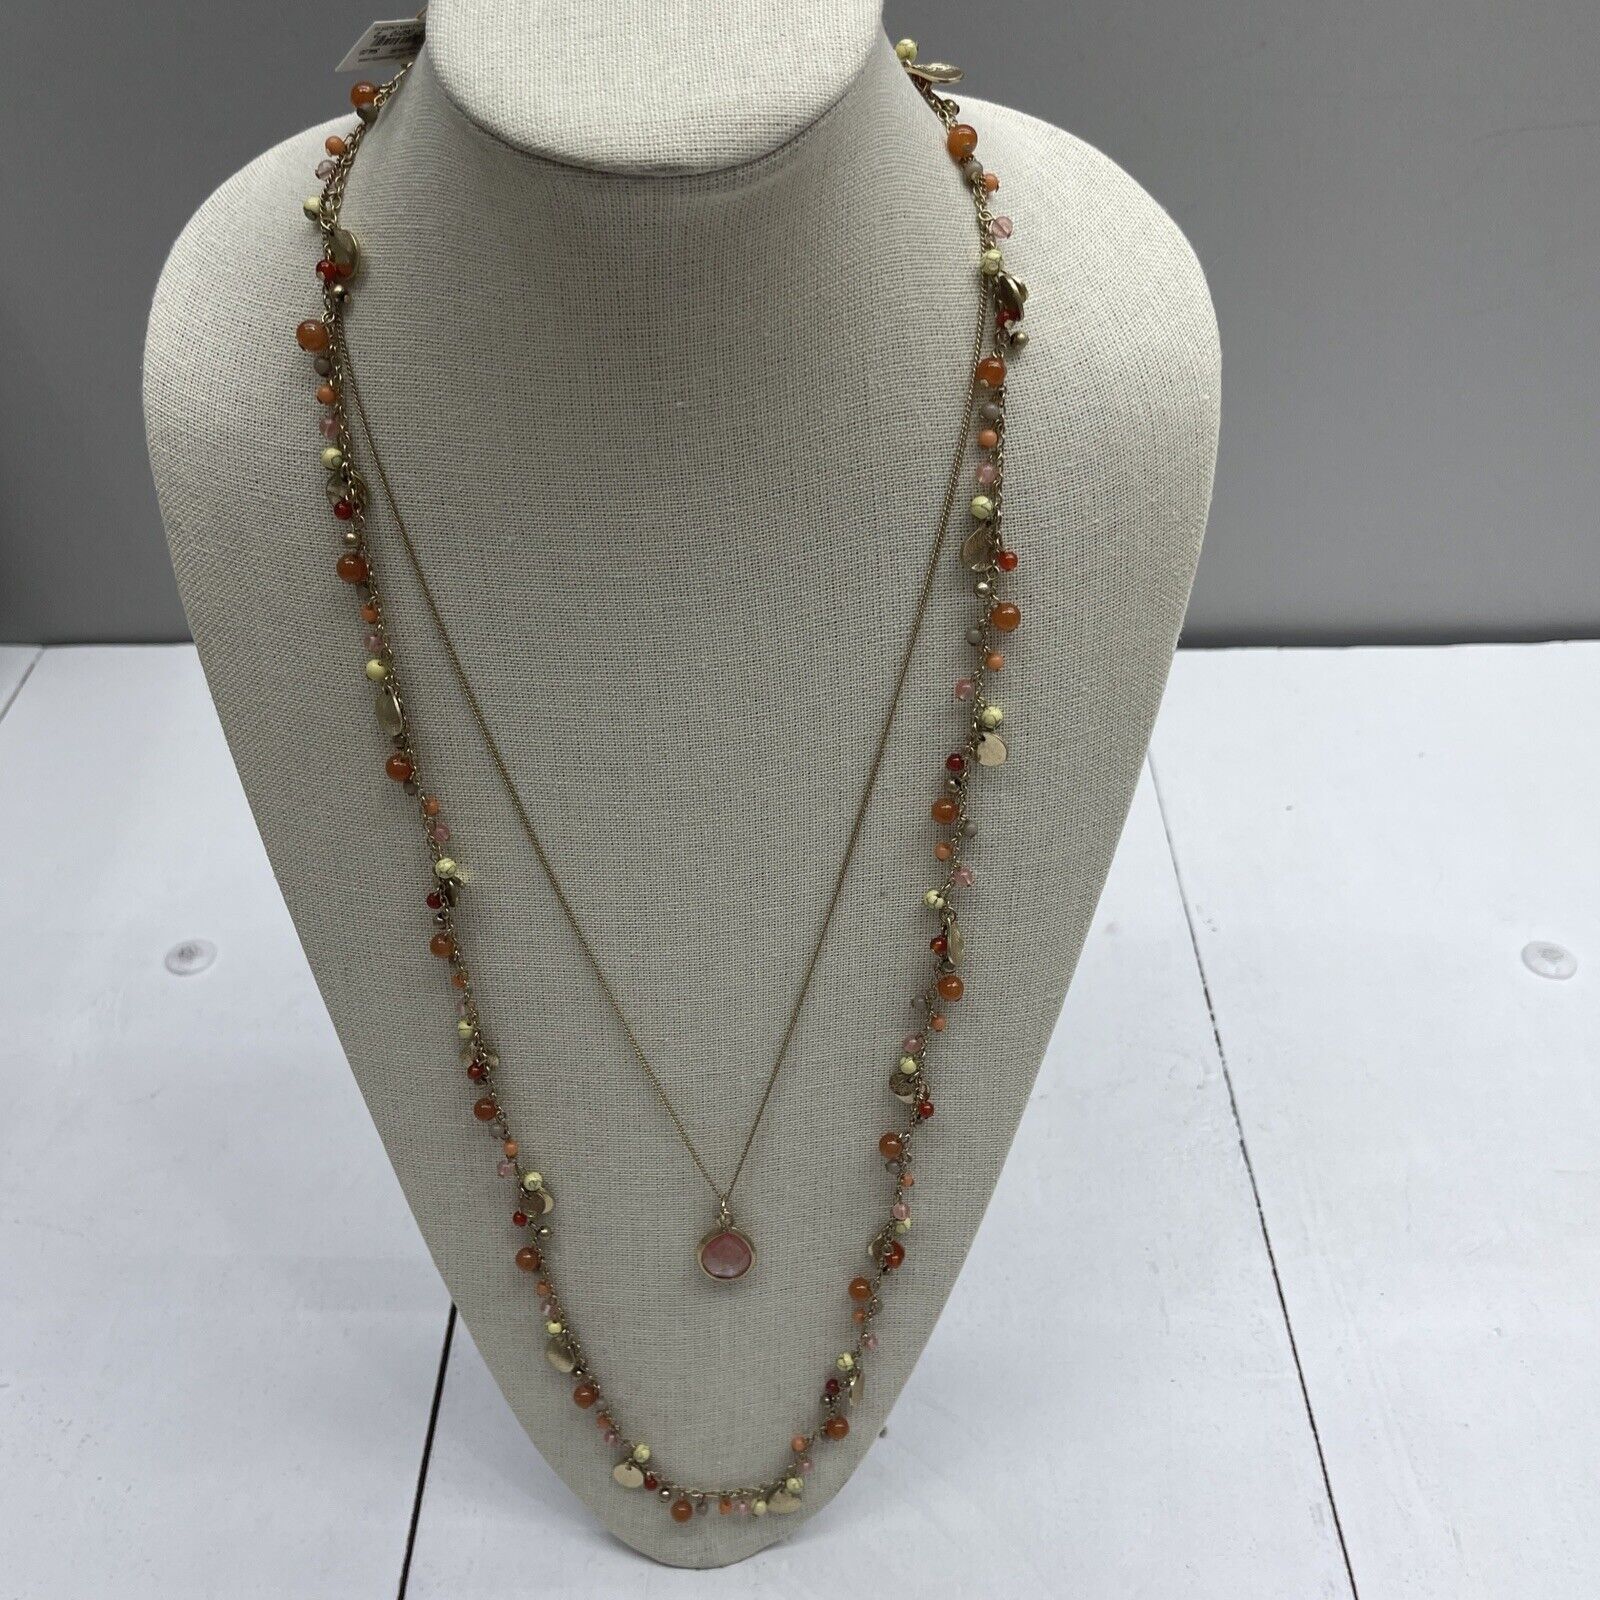 Lonna & Lilly 2 in 1 Orange Beaded Necklace